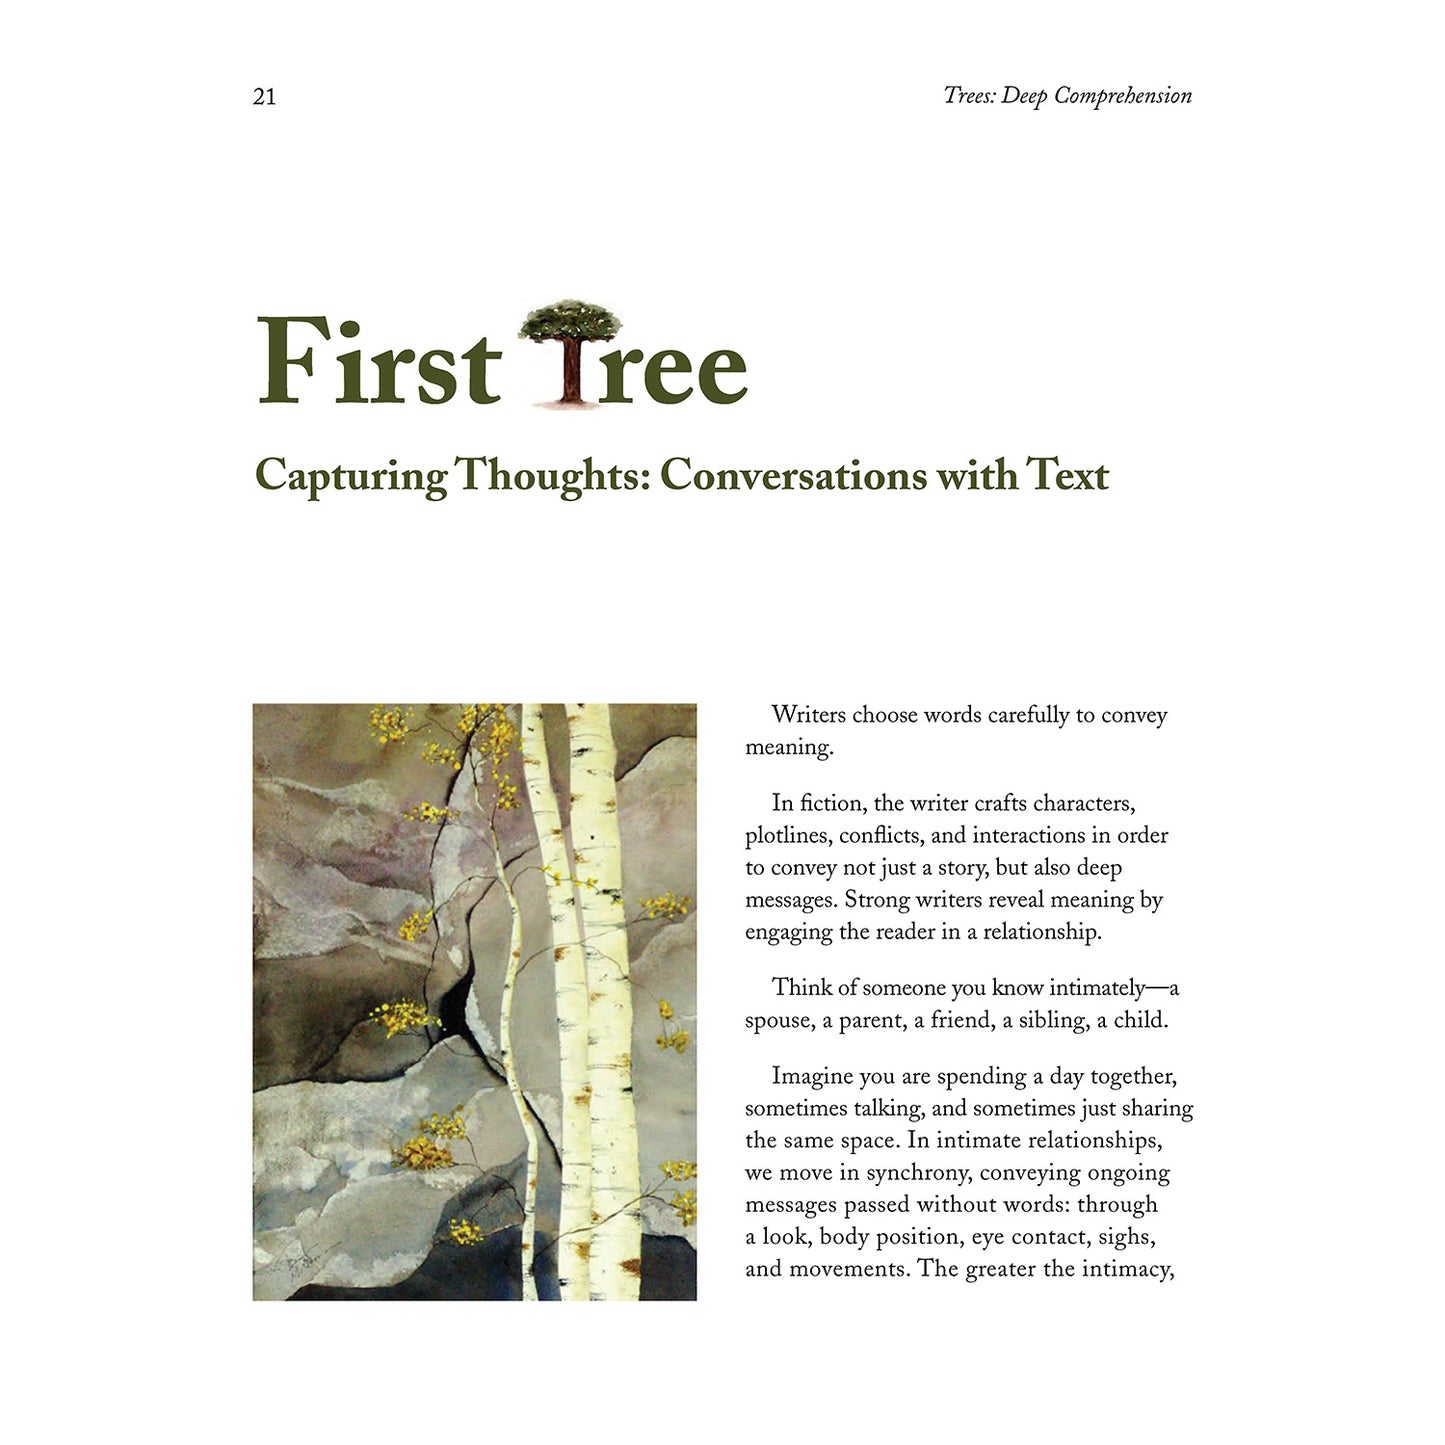 Trees in the Forest: Growing Readers and Writers through Deep Comprehension